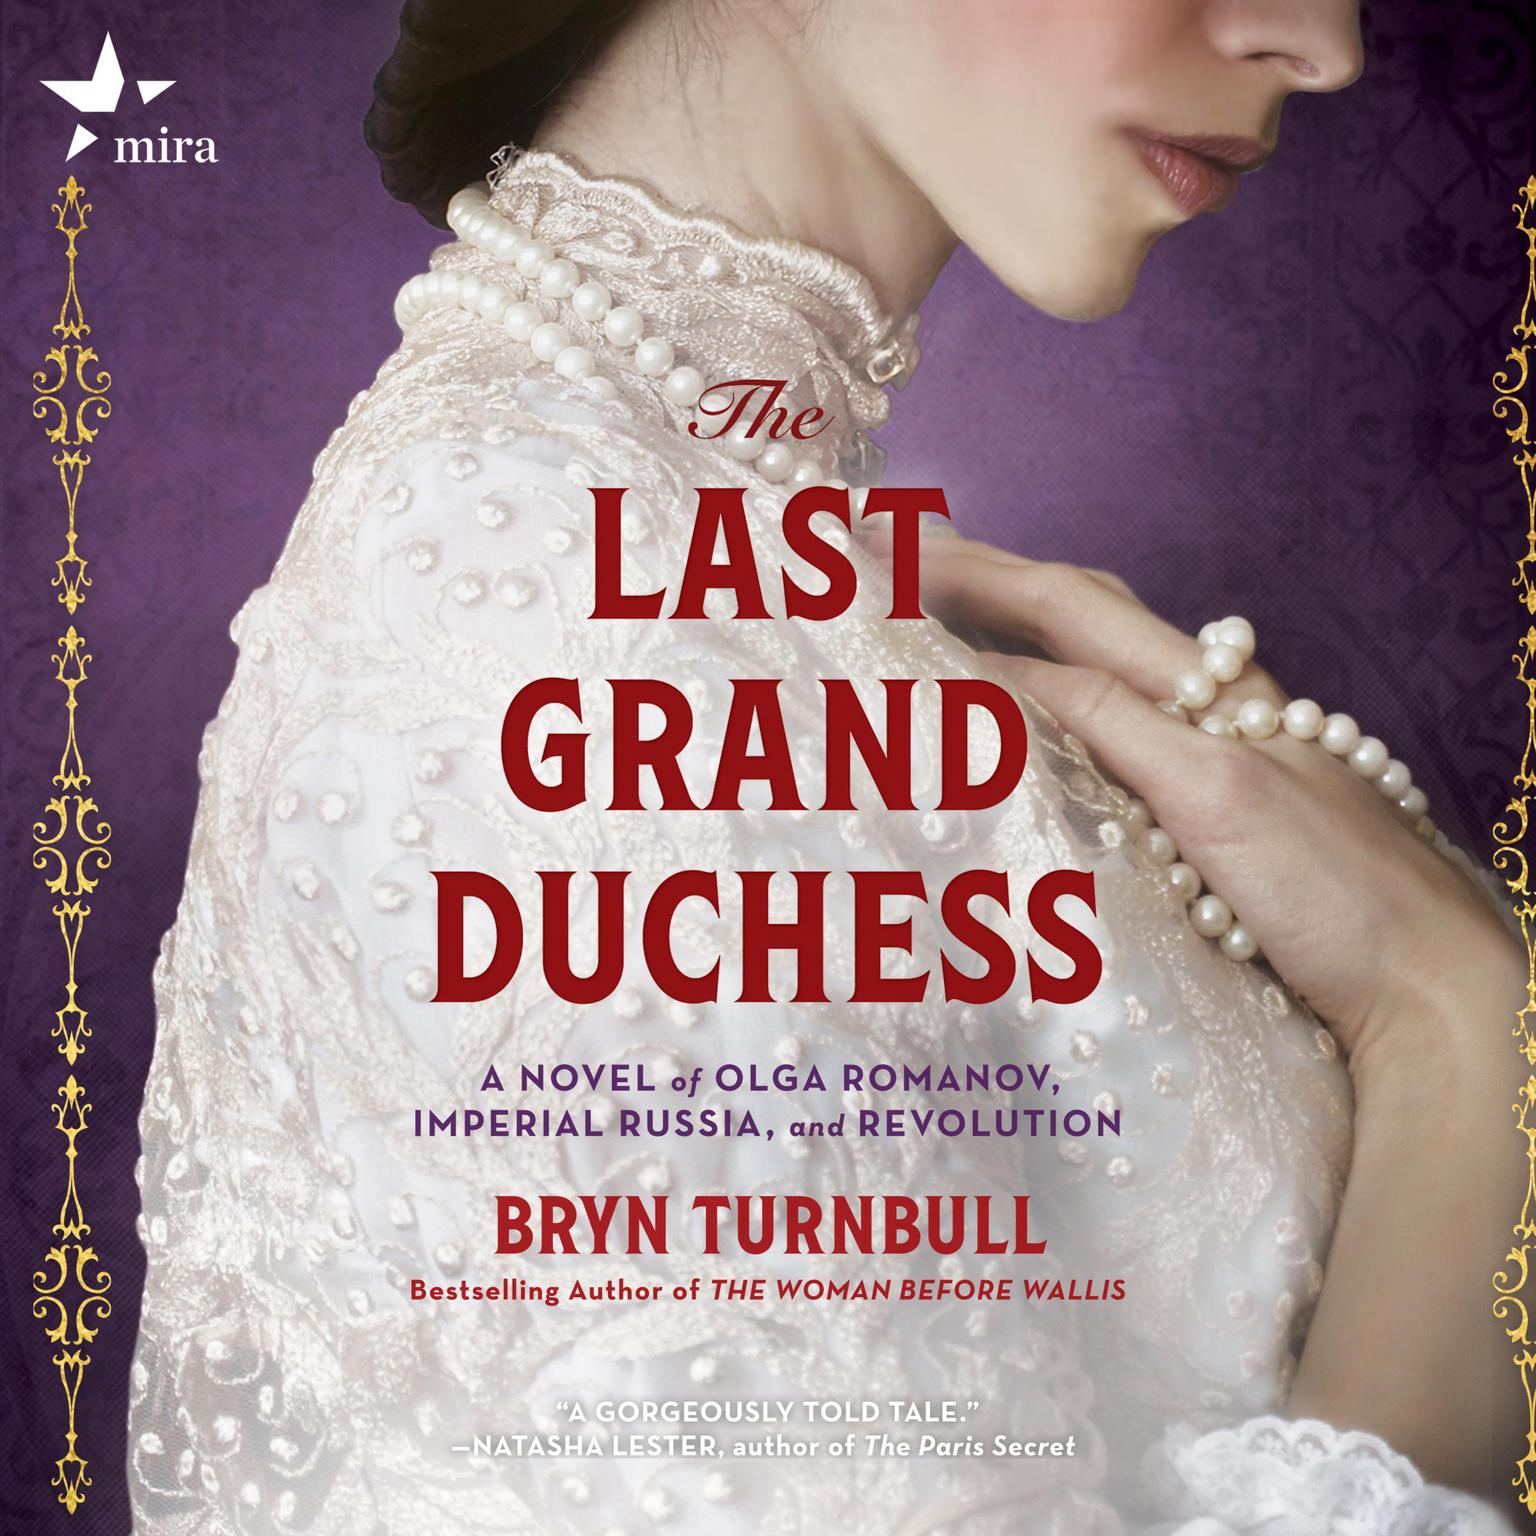 The Last Grand Duchess: A Novel of Olga Romanov, Imperial Russia, and Revolution Audiobook, by Bryn Turnbull